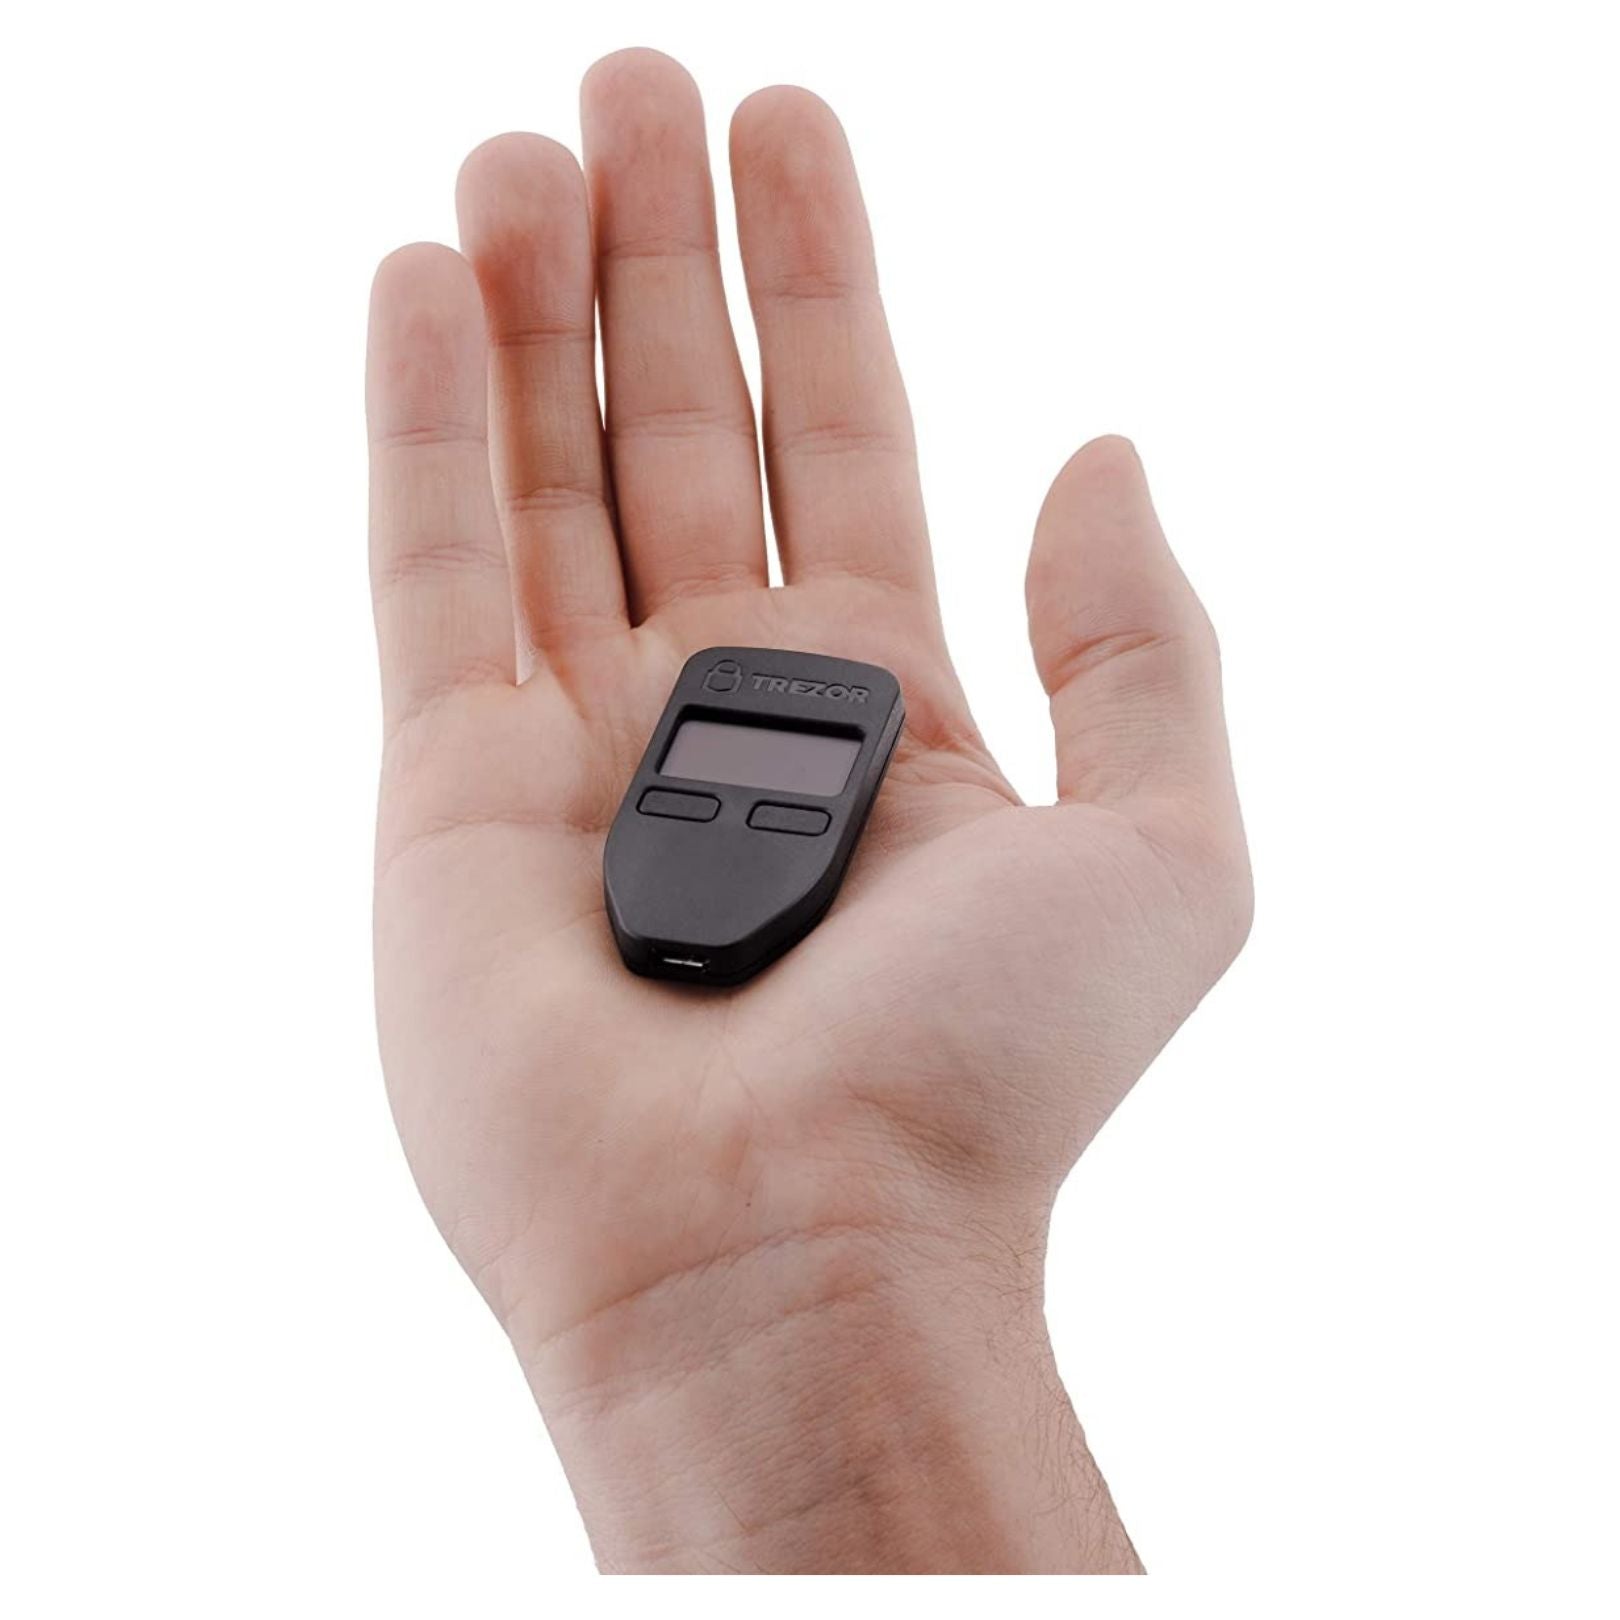 Hand holding a Trezor Model One crypto cold storage wallet.